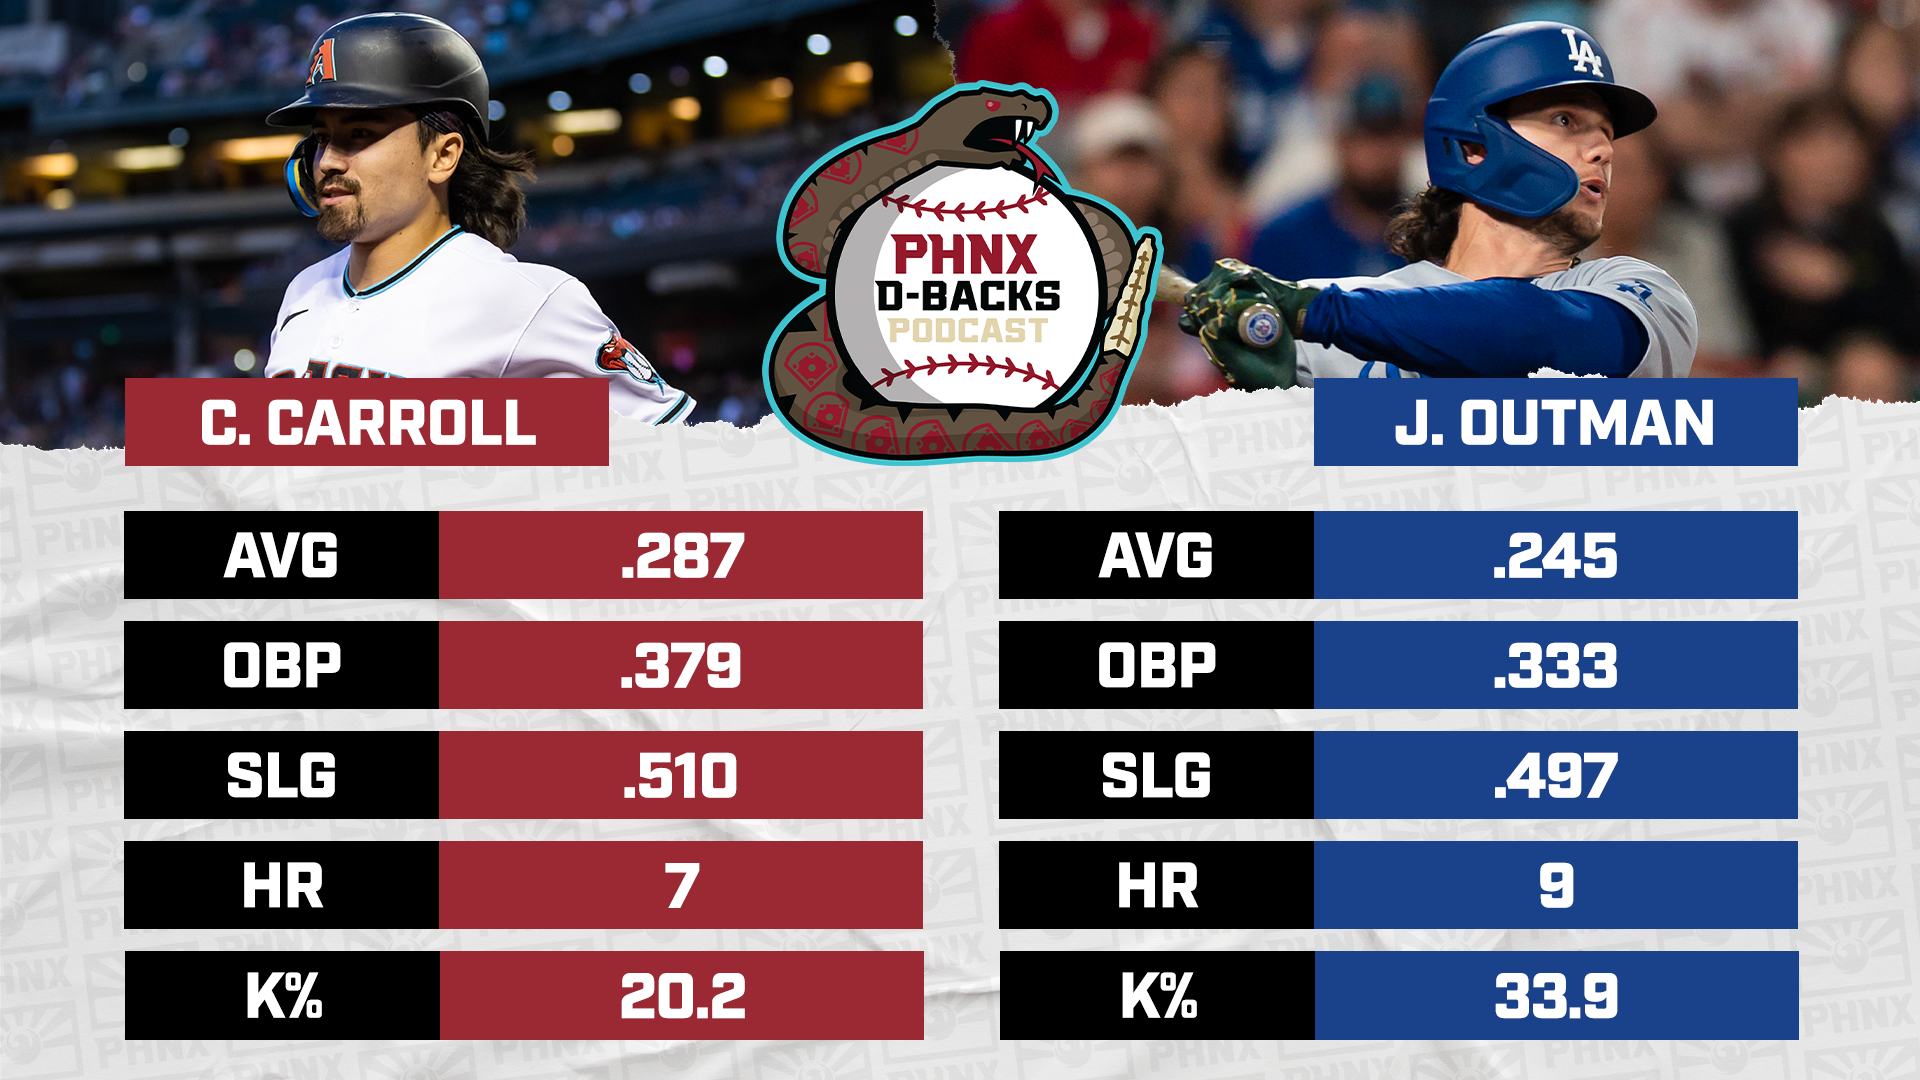 Statistics for Corbin Carroll and James Outman, who are the current front-runners for the NL Rookie of the Year Award.